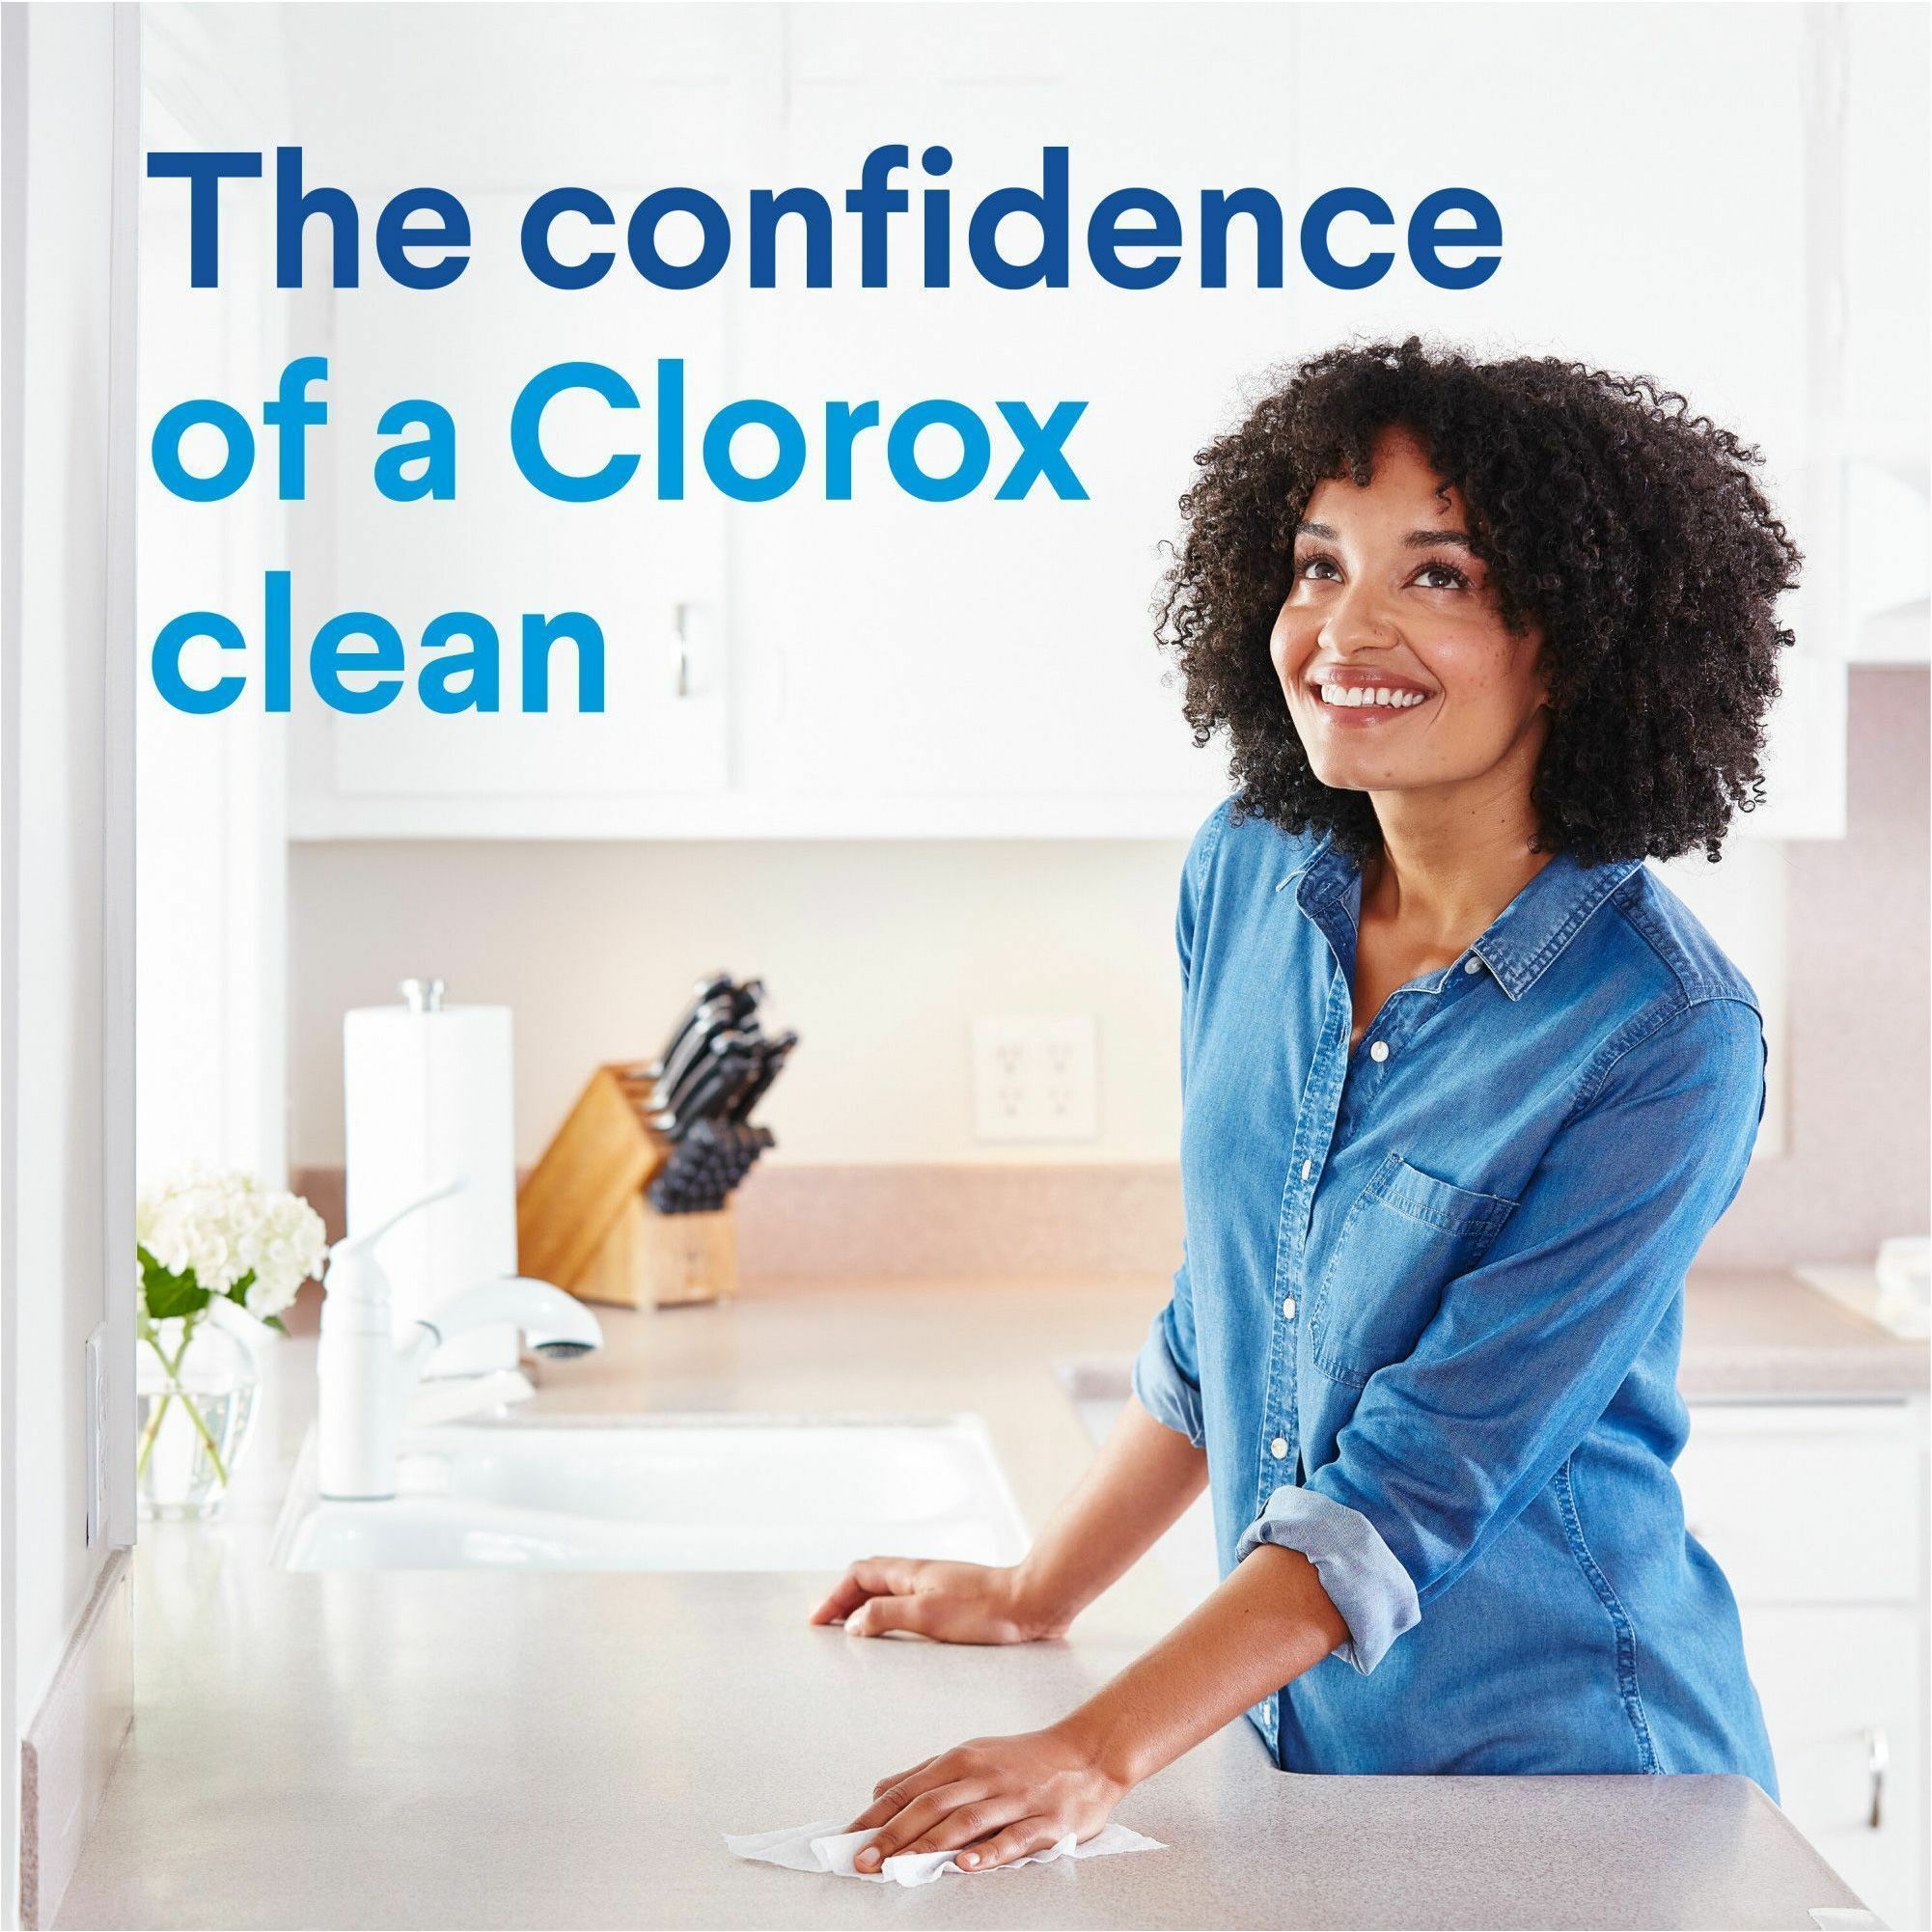 Clorox® Disinfecting Concentrated Bleach